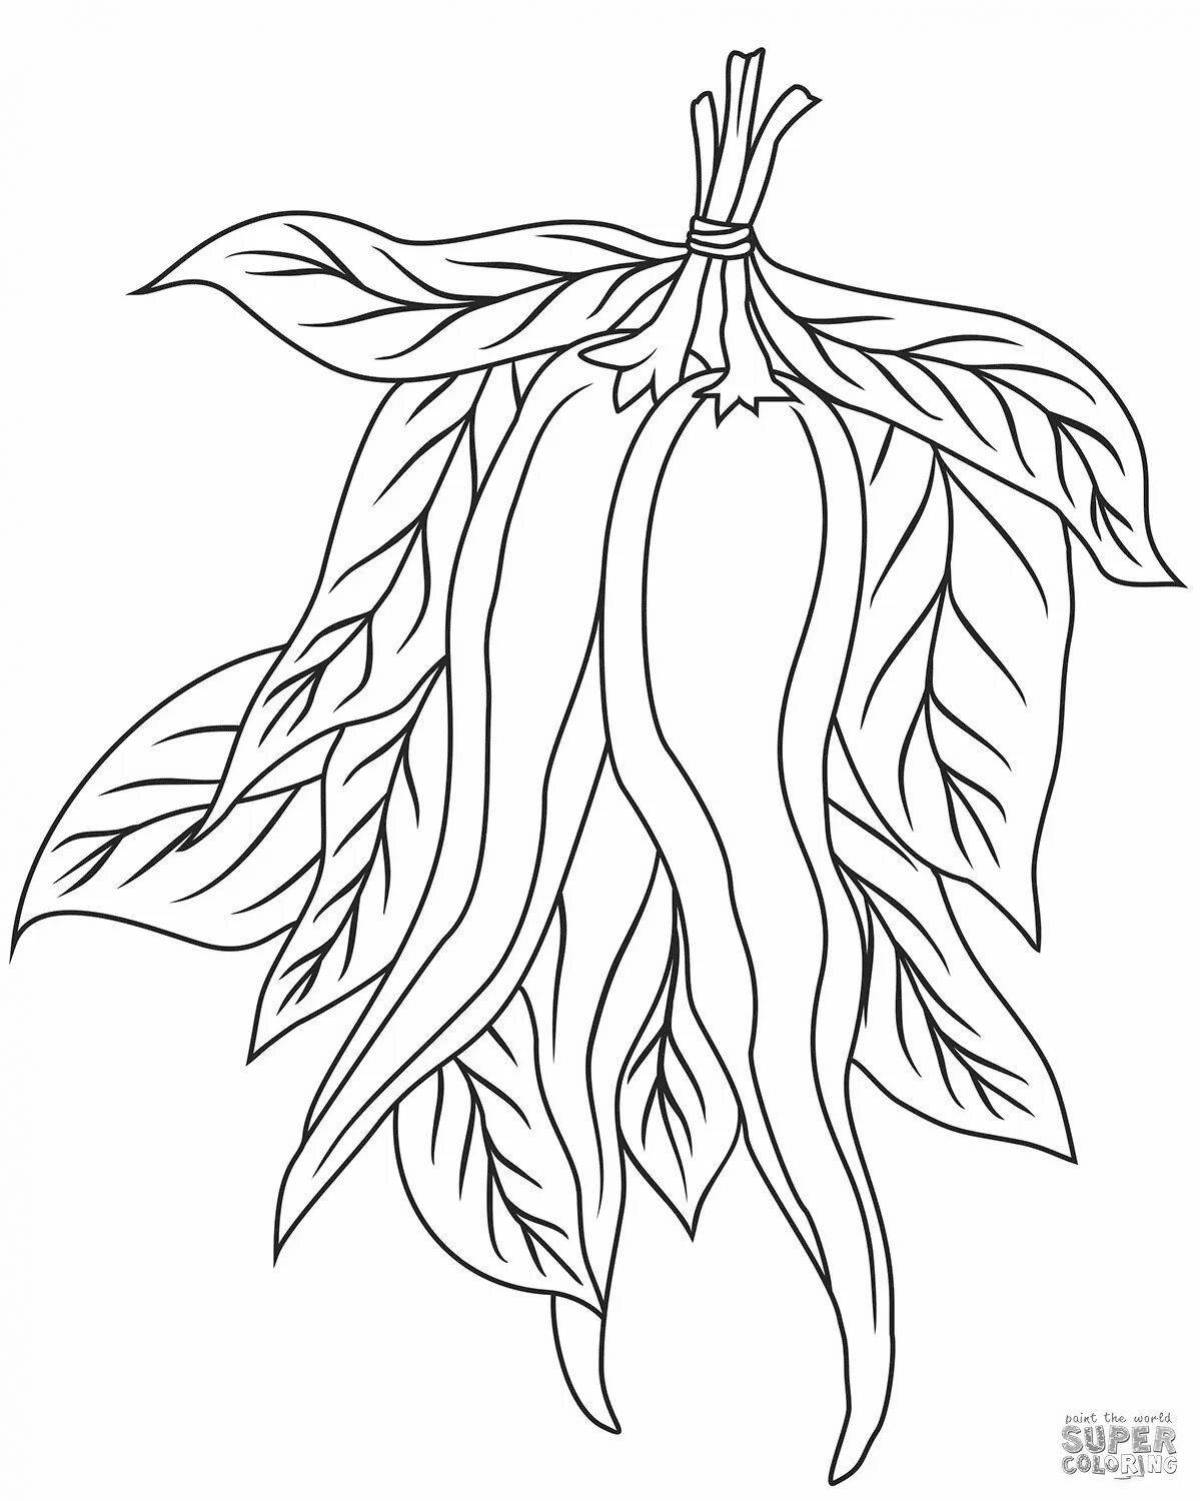 Living chili coloring page